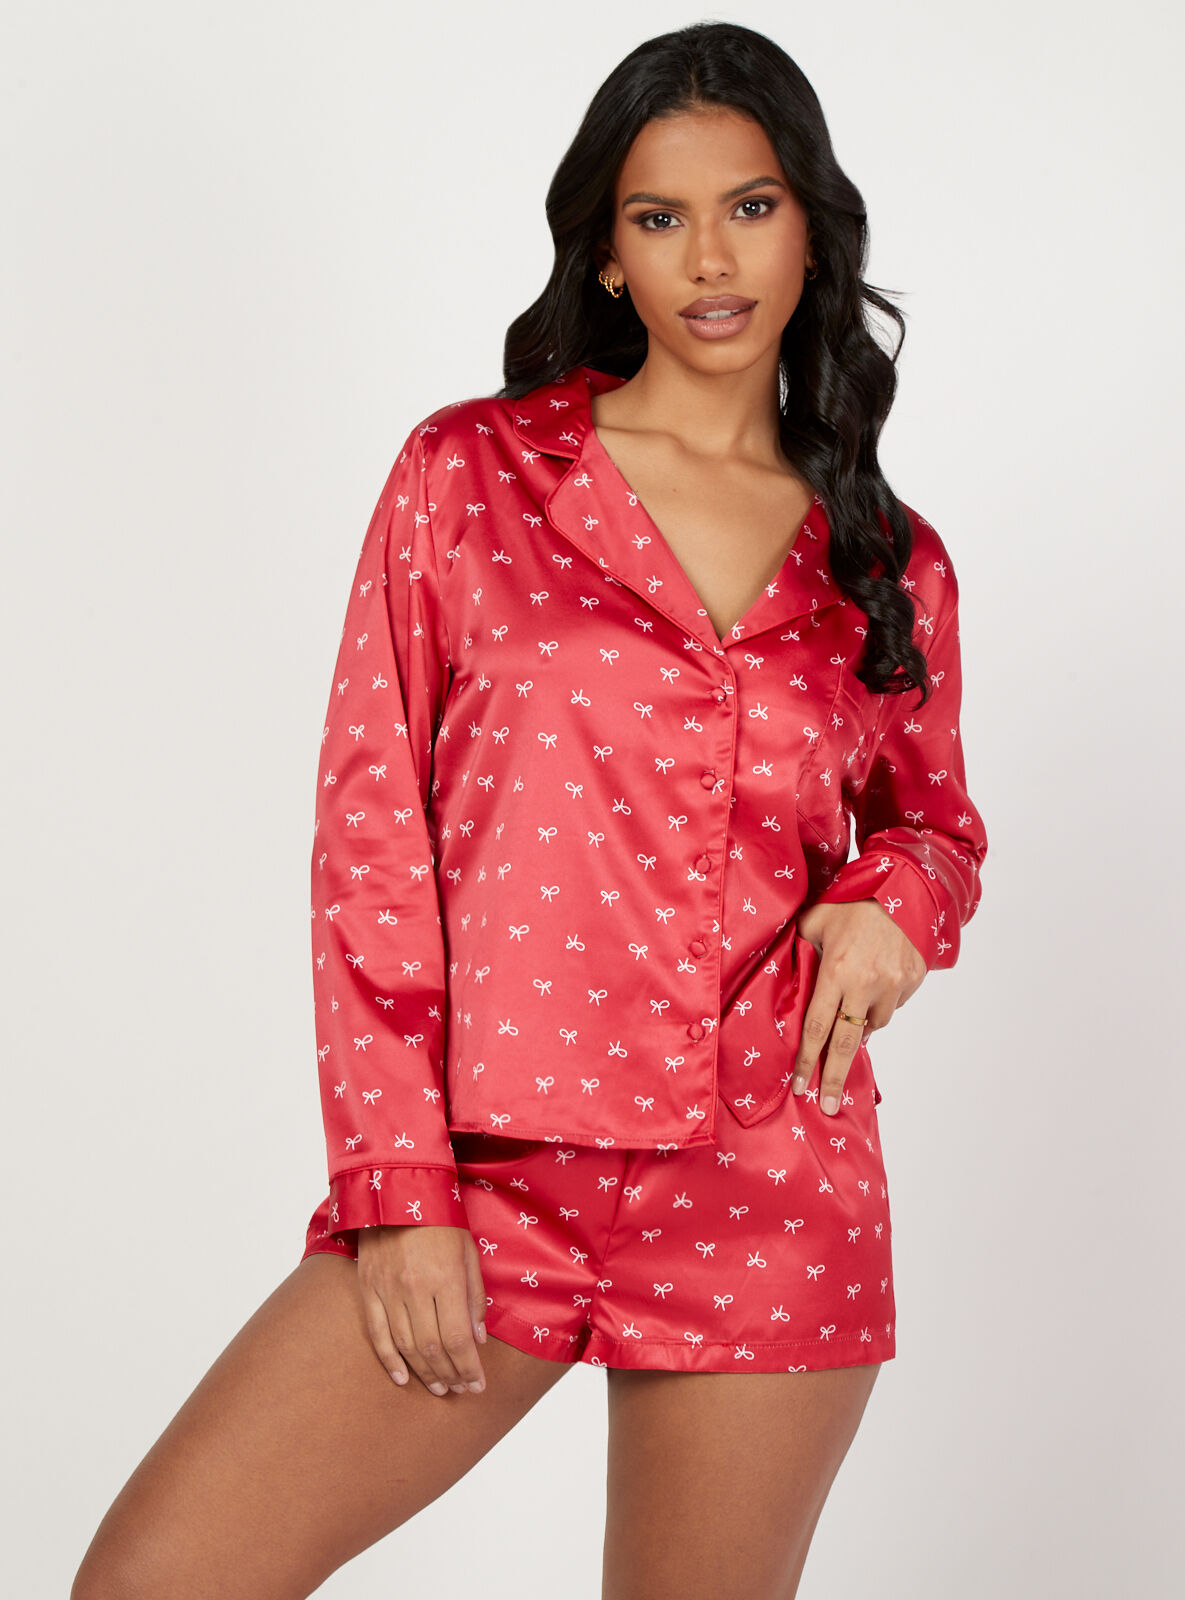 Boux Avenue Bow print satin revere and shorts set - Red Mix - 12